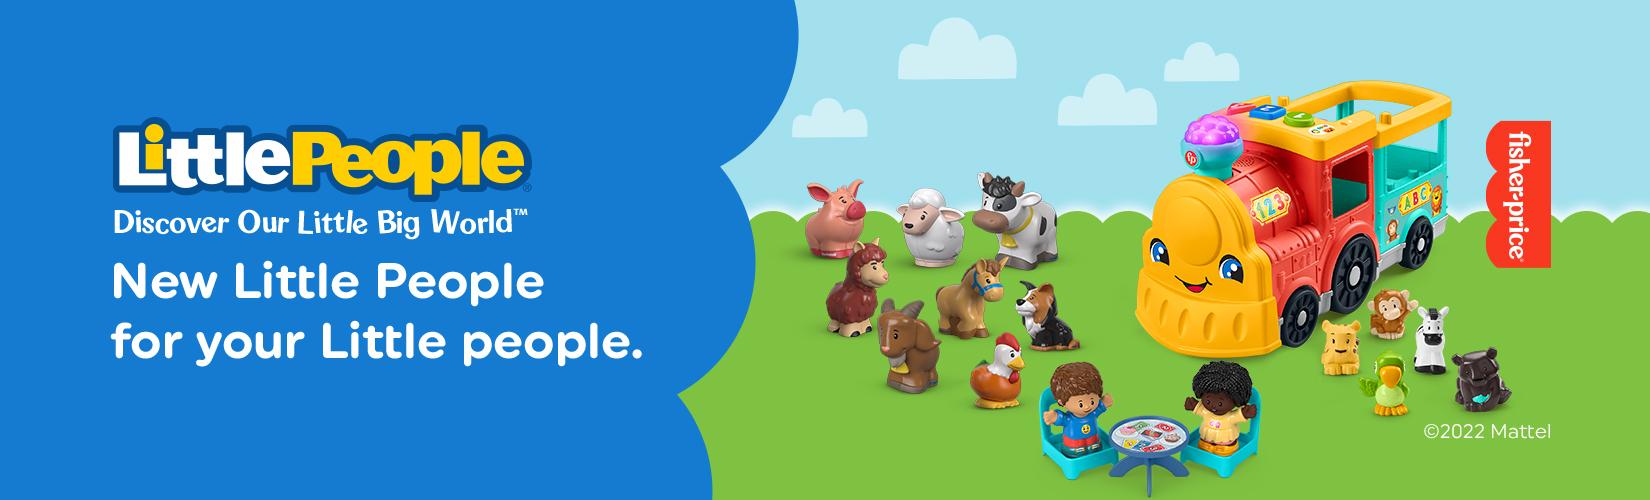 Little People. Discover Our Little Big World™. New Little People for your Little people.